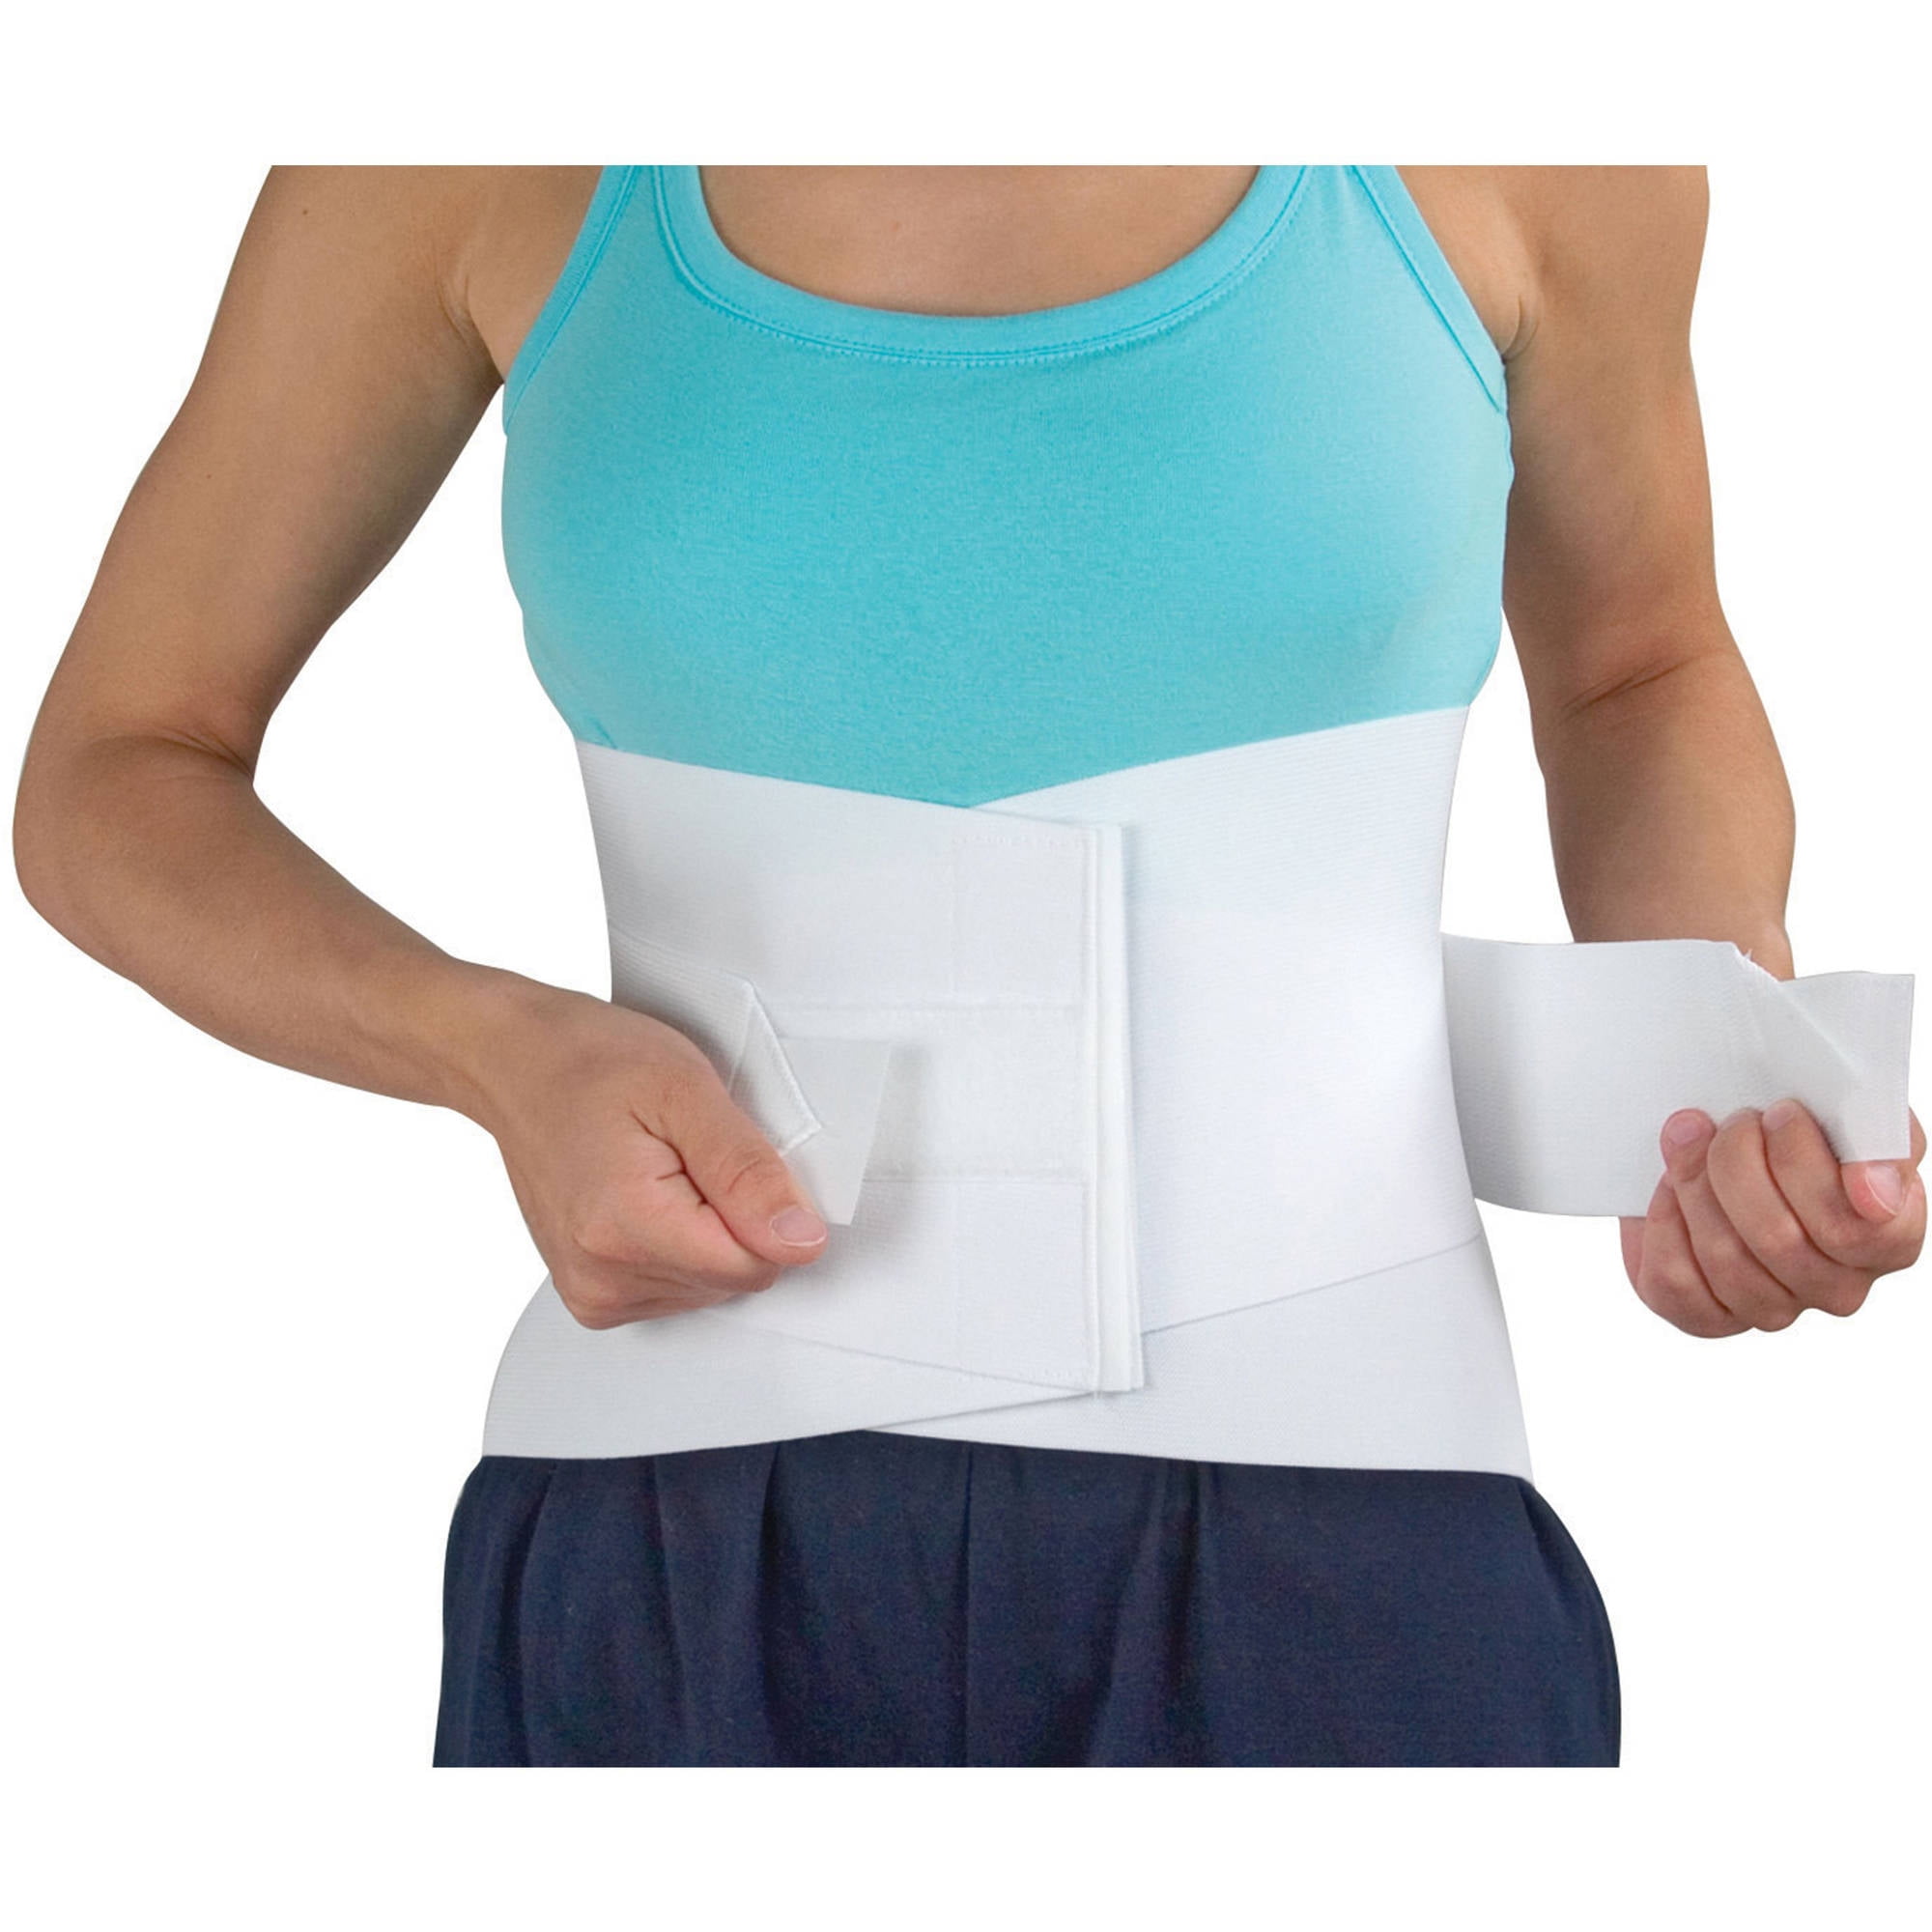 DMI Back Brace for Lower Back Pain with Removable Stays, Adjustable Lumbar Support Belt for Men and Women, Back Straightener Waist Band, Back Brace for Posture and Waist Support, Small 24 to